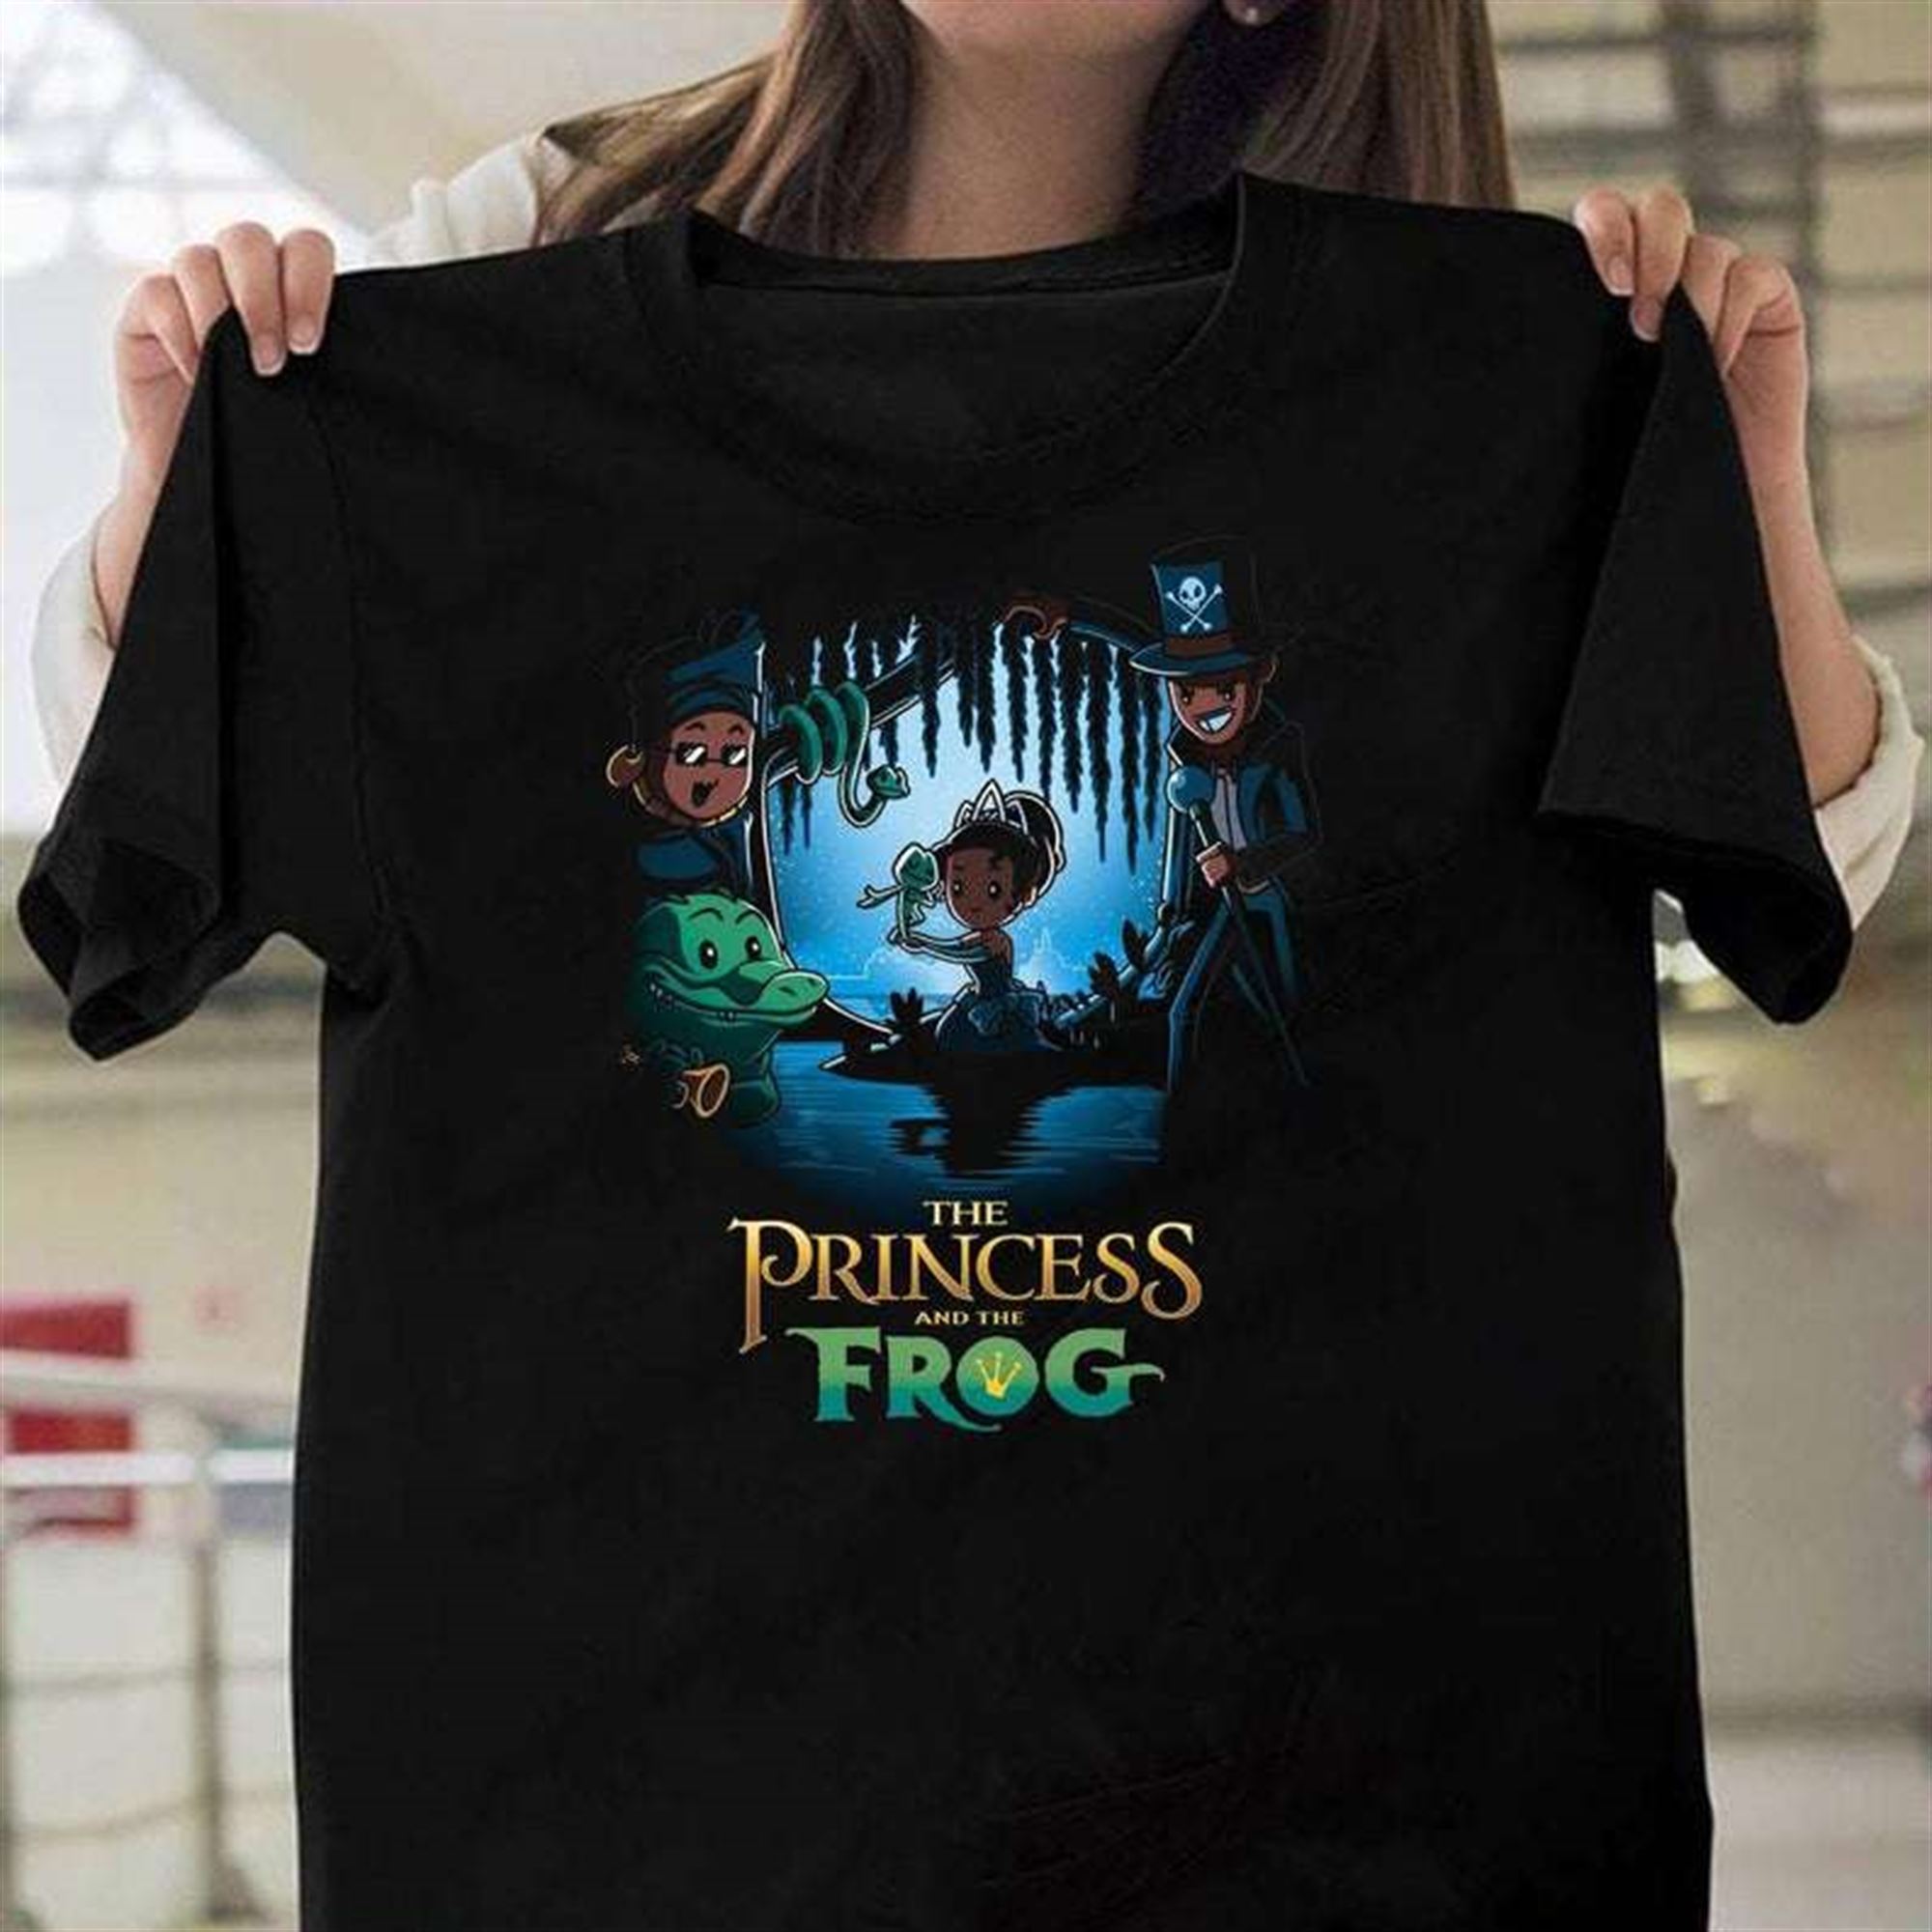 The Princess And The Frog T Shirt Full Size Up To 5xl